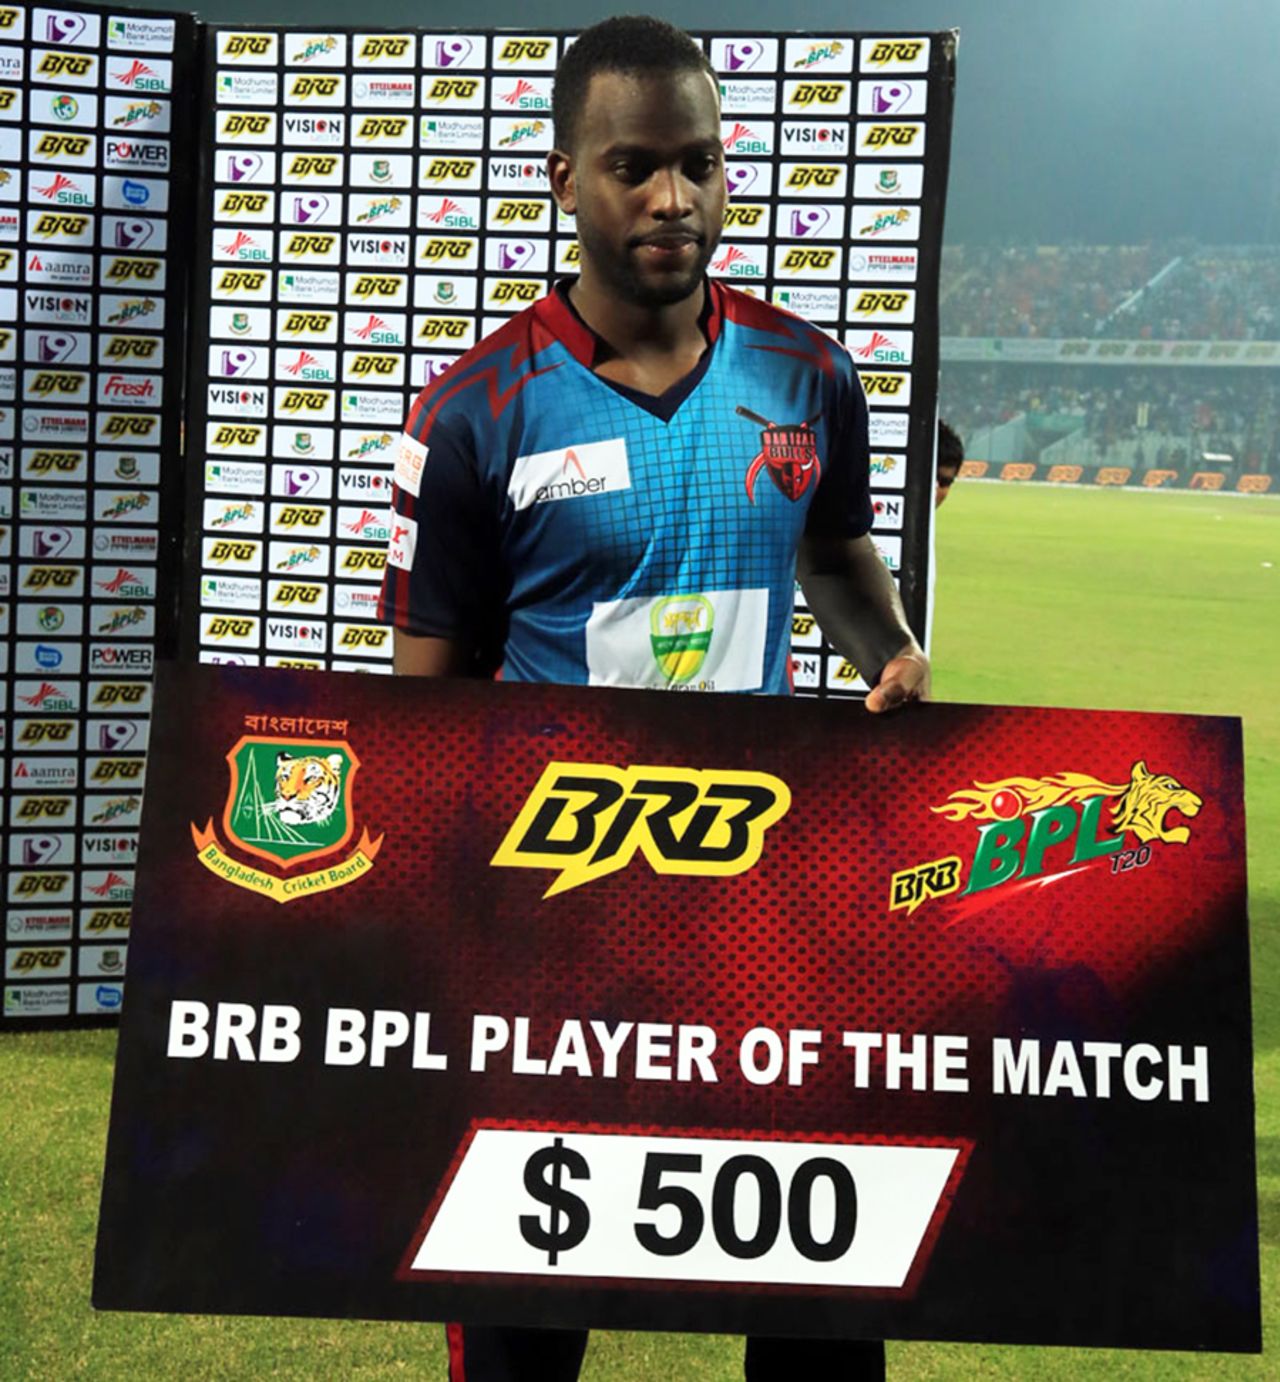 Kevon Cooper was named Man of the Match for his unbeaten 21 and a three-wicket haul, Chittagong Vikings v Barisal Bulls, BPL 2015-16, Chittagong, November 30, 2015